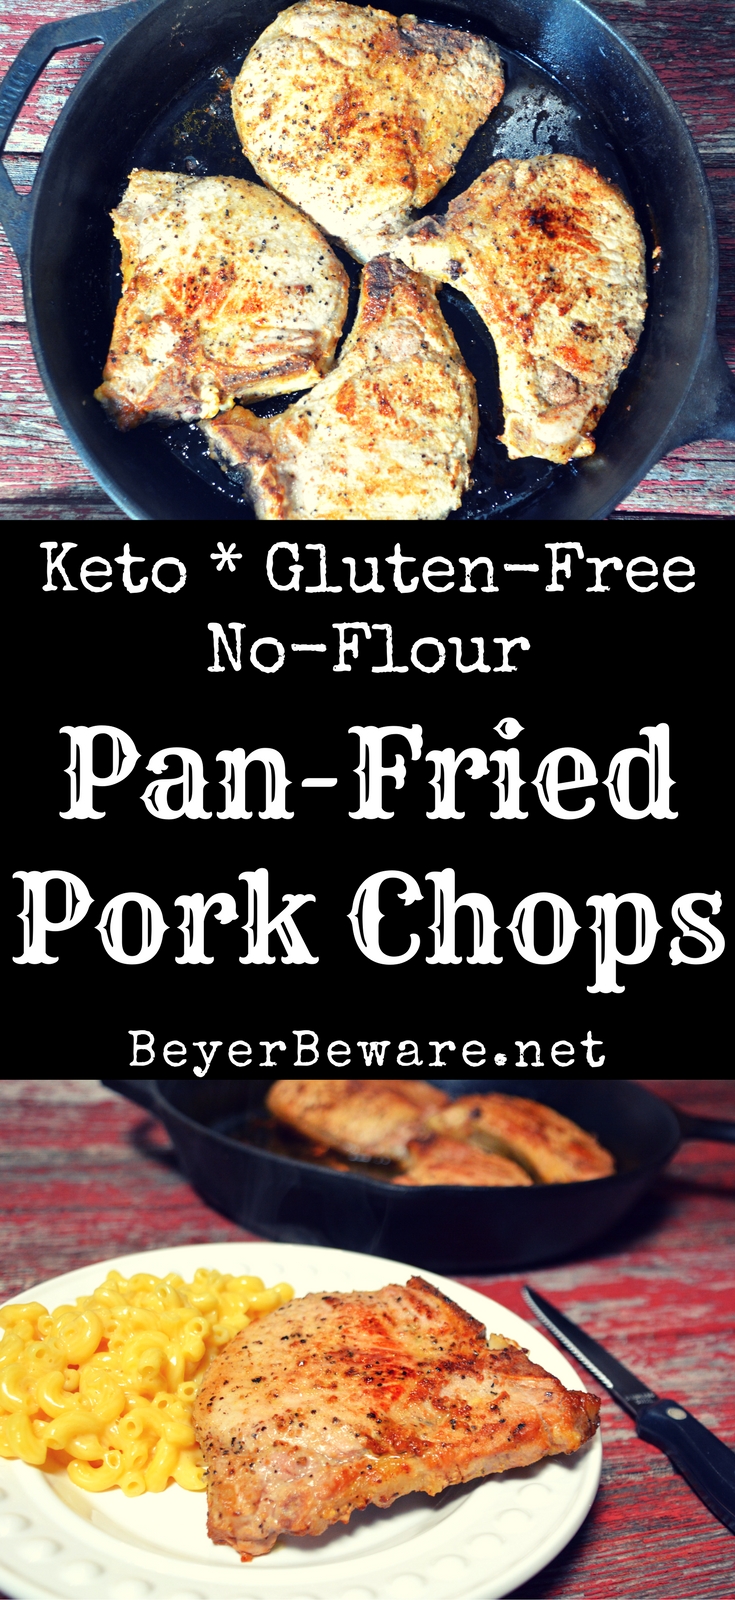 Pan-Fried pork chops recipe is my go-to recipe since there is no flour, no marinading, no waiting, just juicy, flavorful pork chops cooked in a buttered cast iron skillet. #PorkChops #Keto #KetoRecipes #CastIron #LowCarb